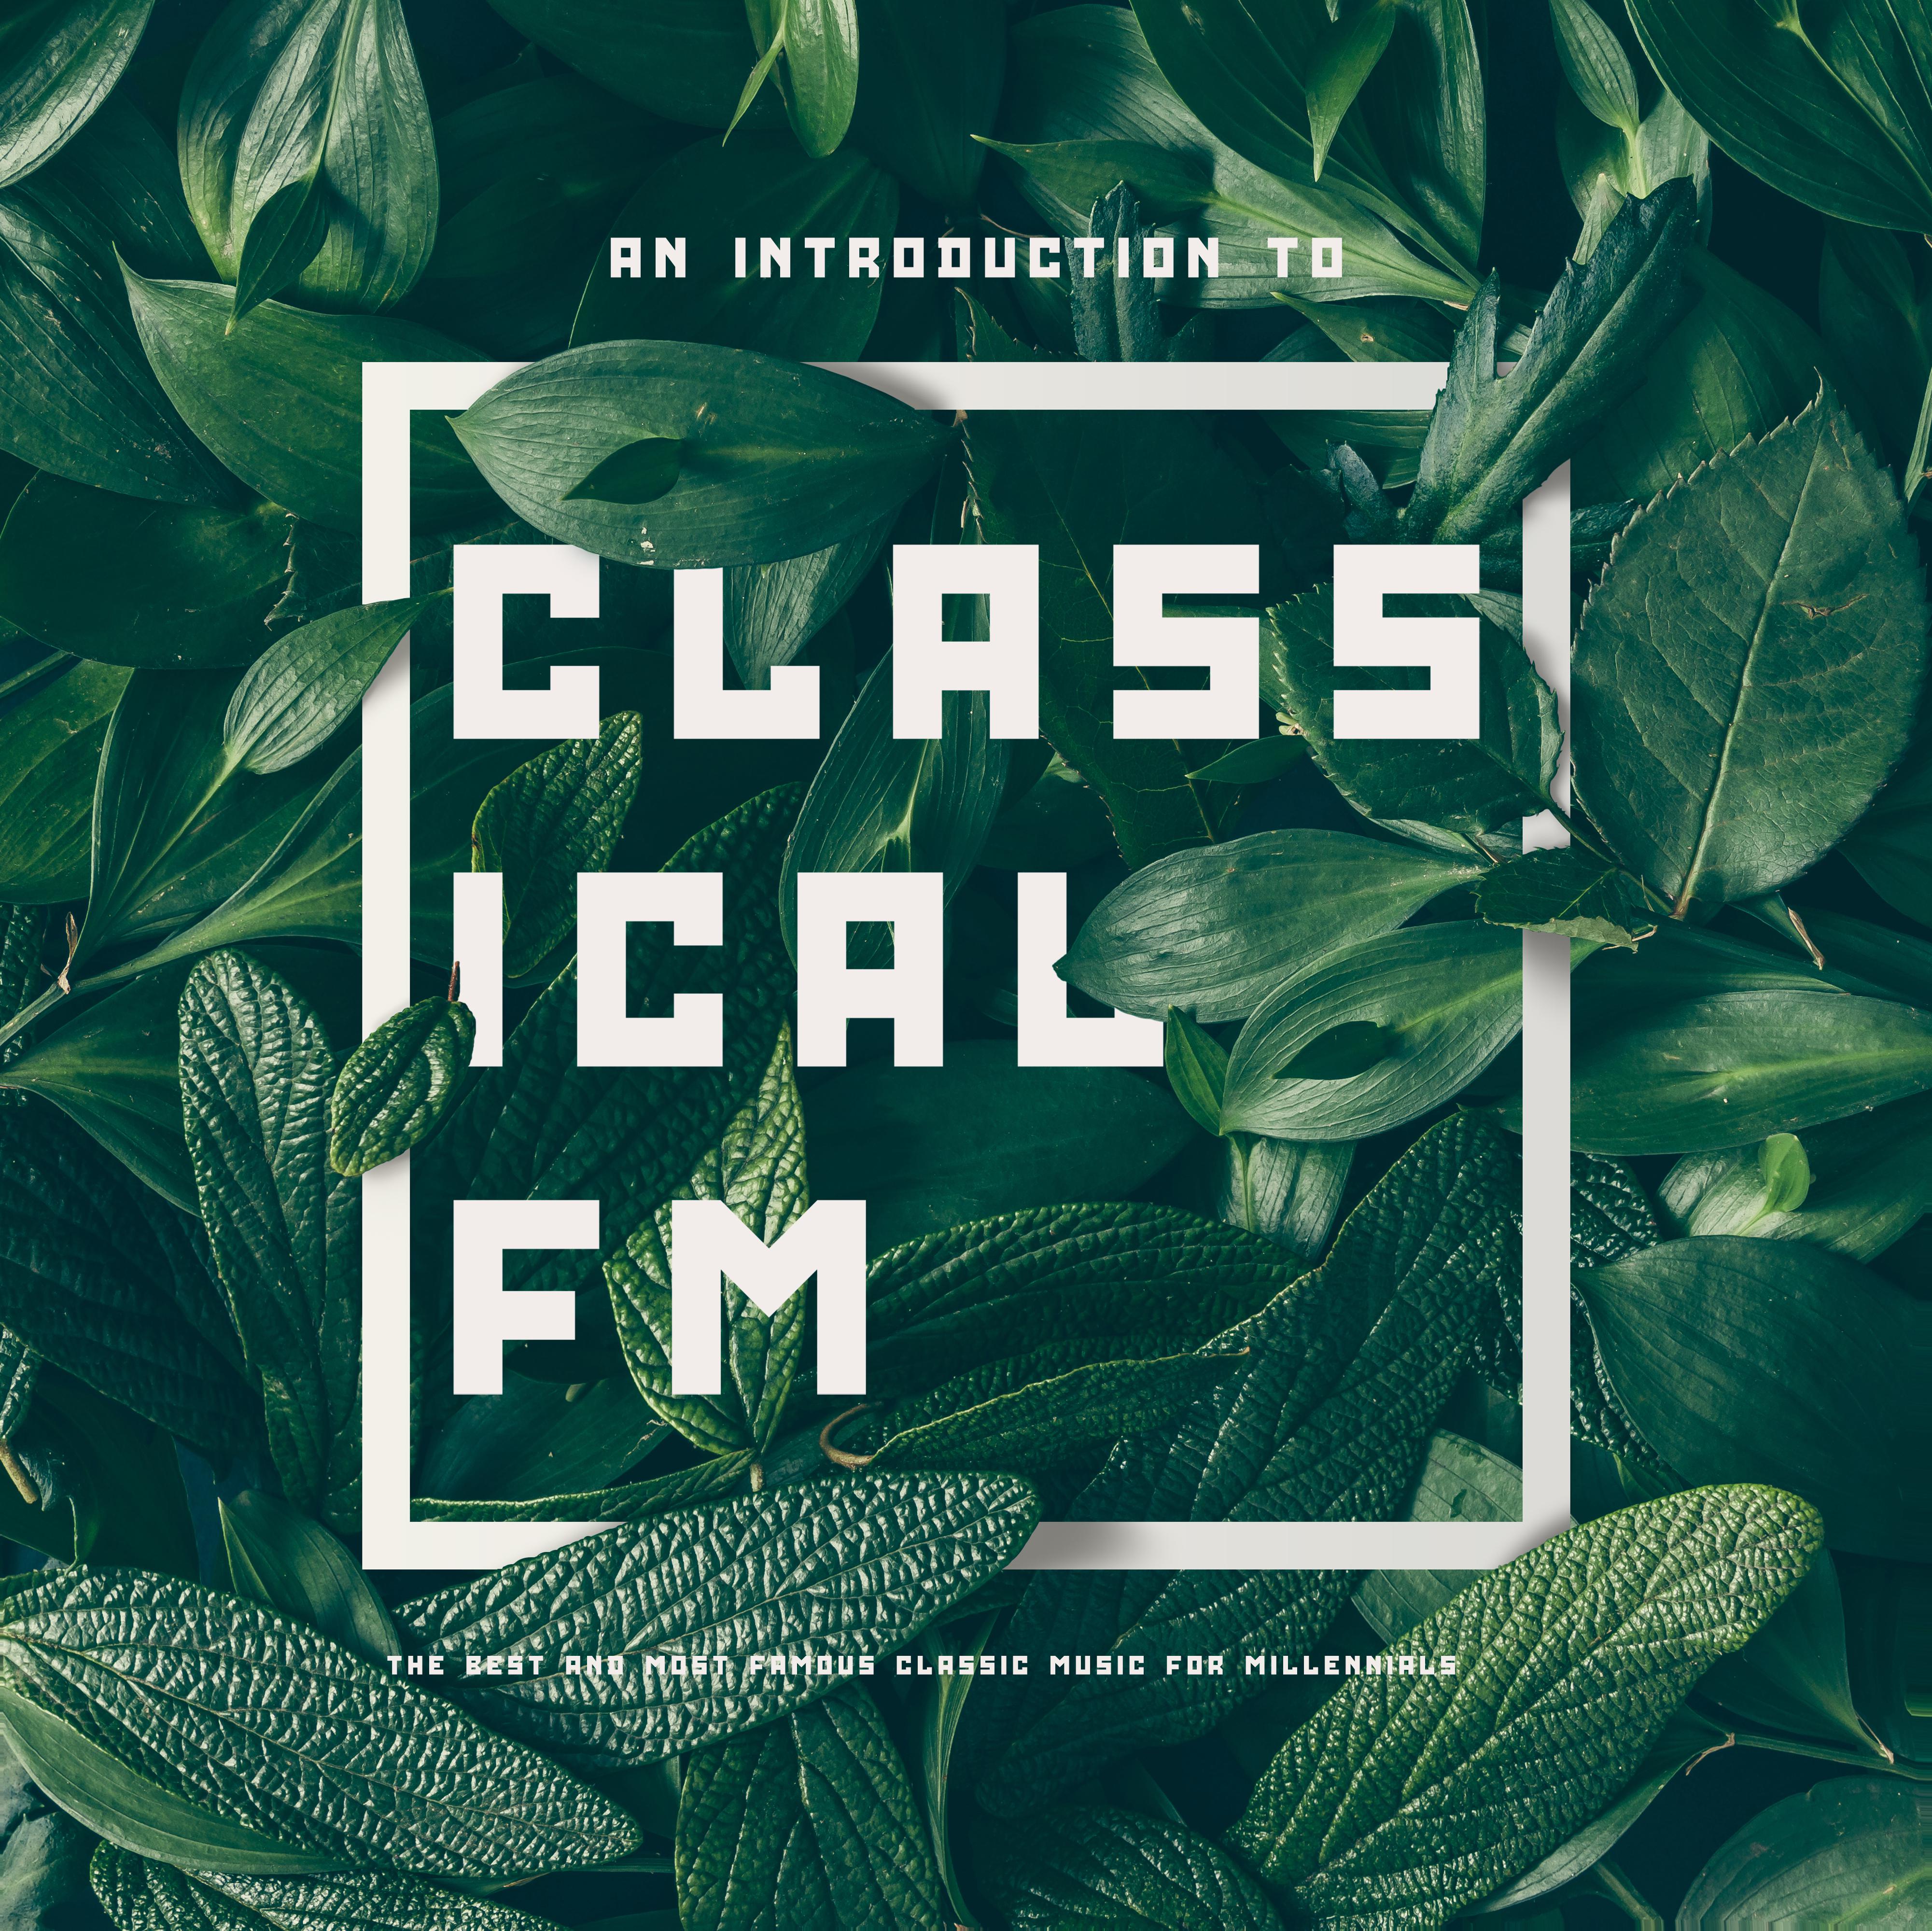 Classical FM: An Introduction To The Best and Most Famous Classic Music For Millennials